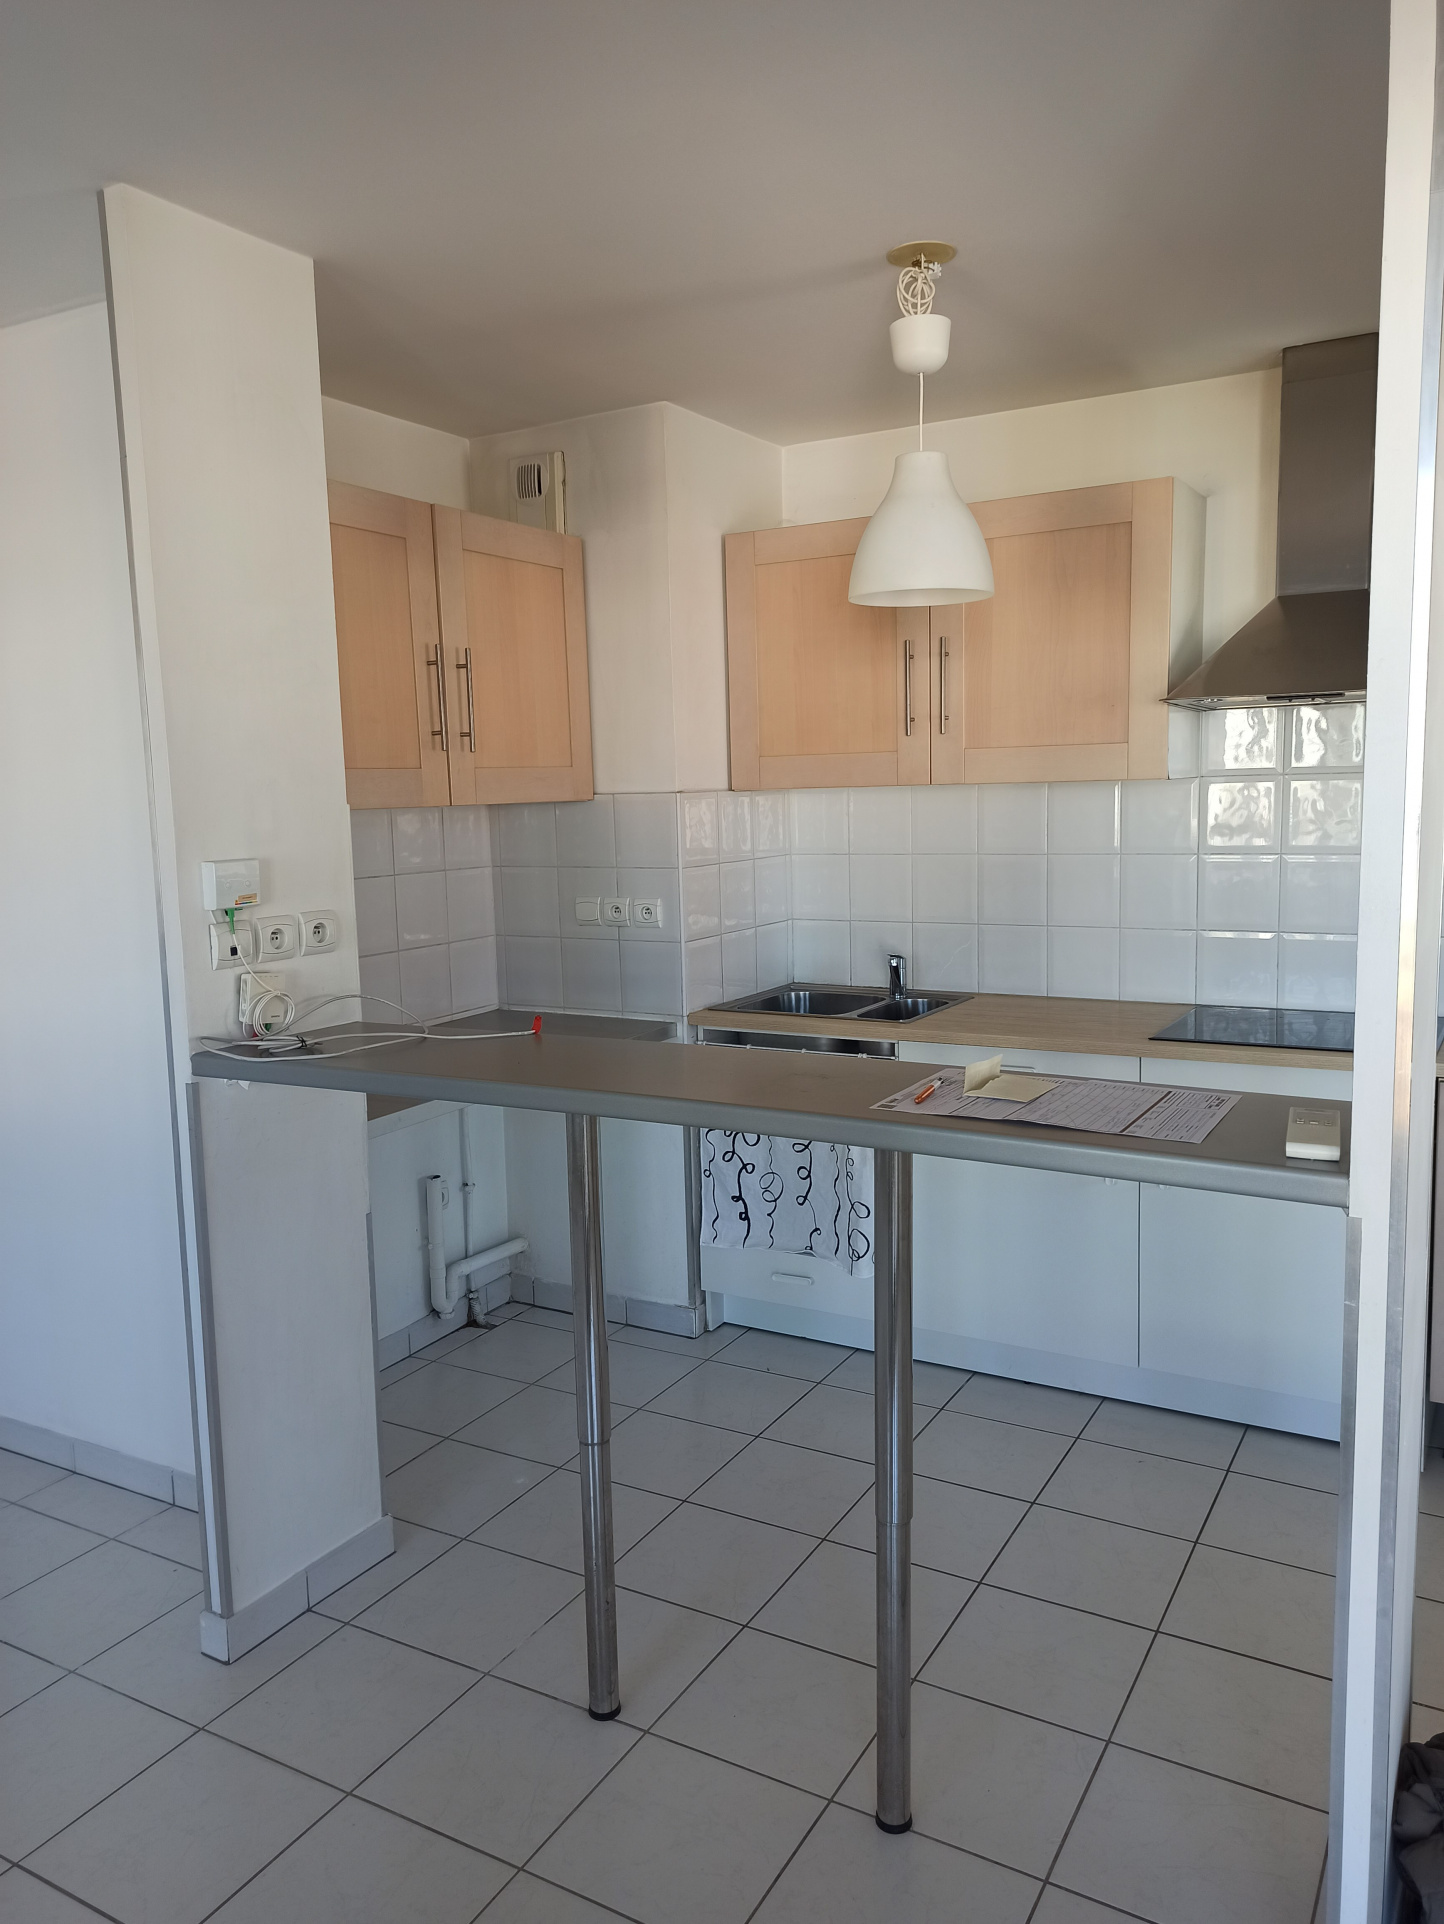 Toulouse,31200,3 Rooms Rooms,Appartement,1001